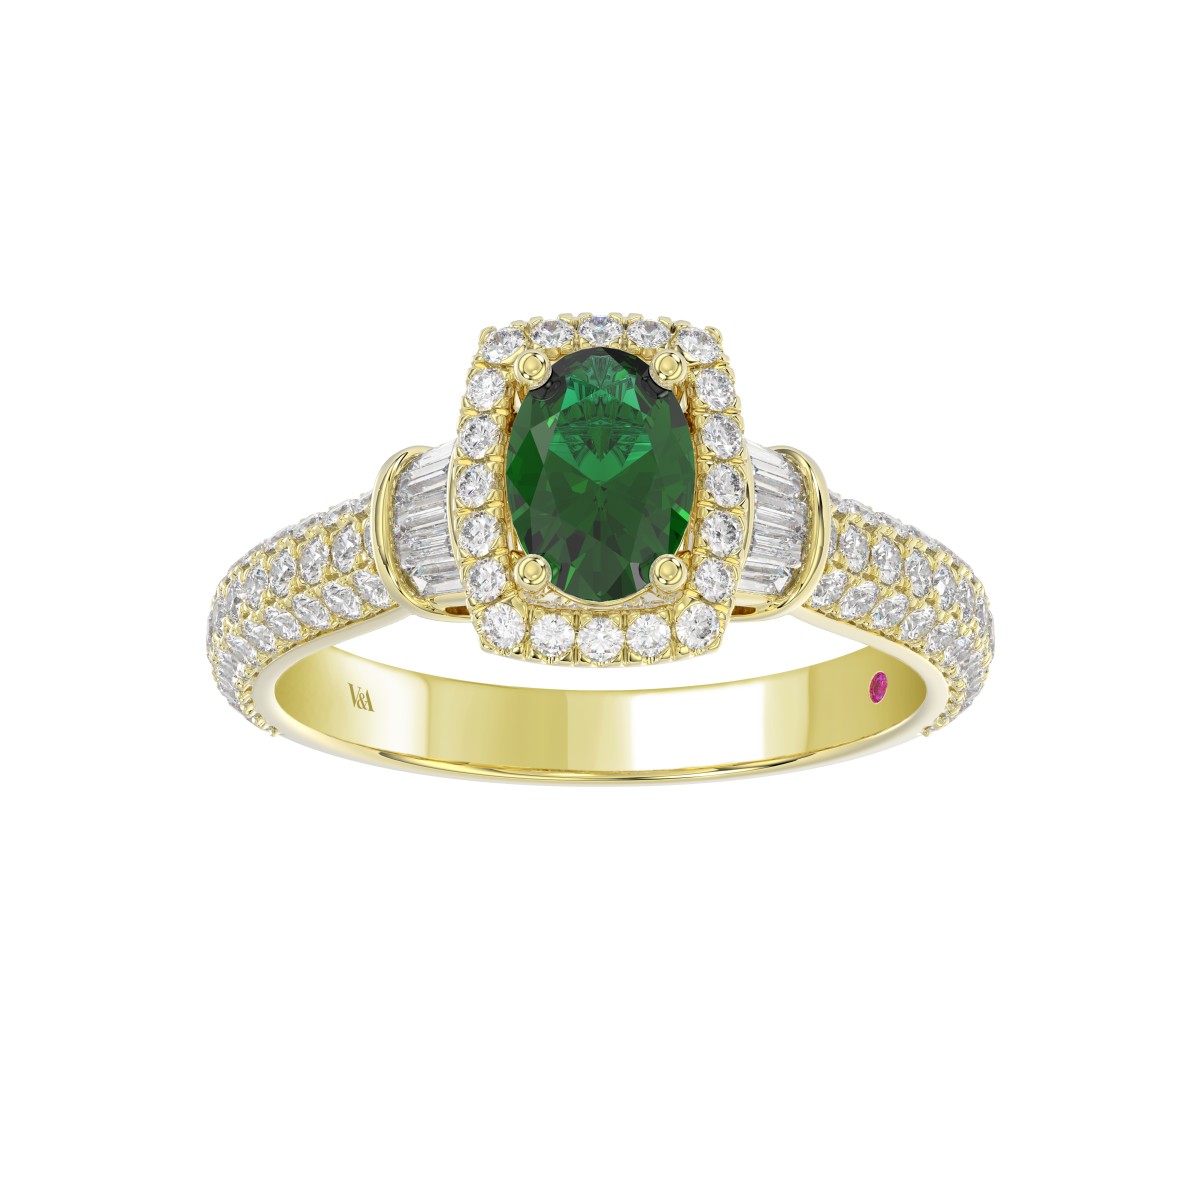 14K YELLOW GOLD 1 1/2CT ROUND/BAGUETTE/OVAL DIAMOND LADIES FASHION RING(COLOR STONE OVAL GREEN EMERALD DIAMOND 3/4CT)